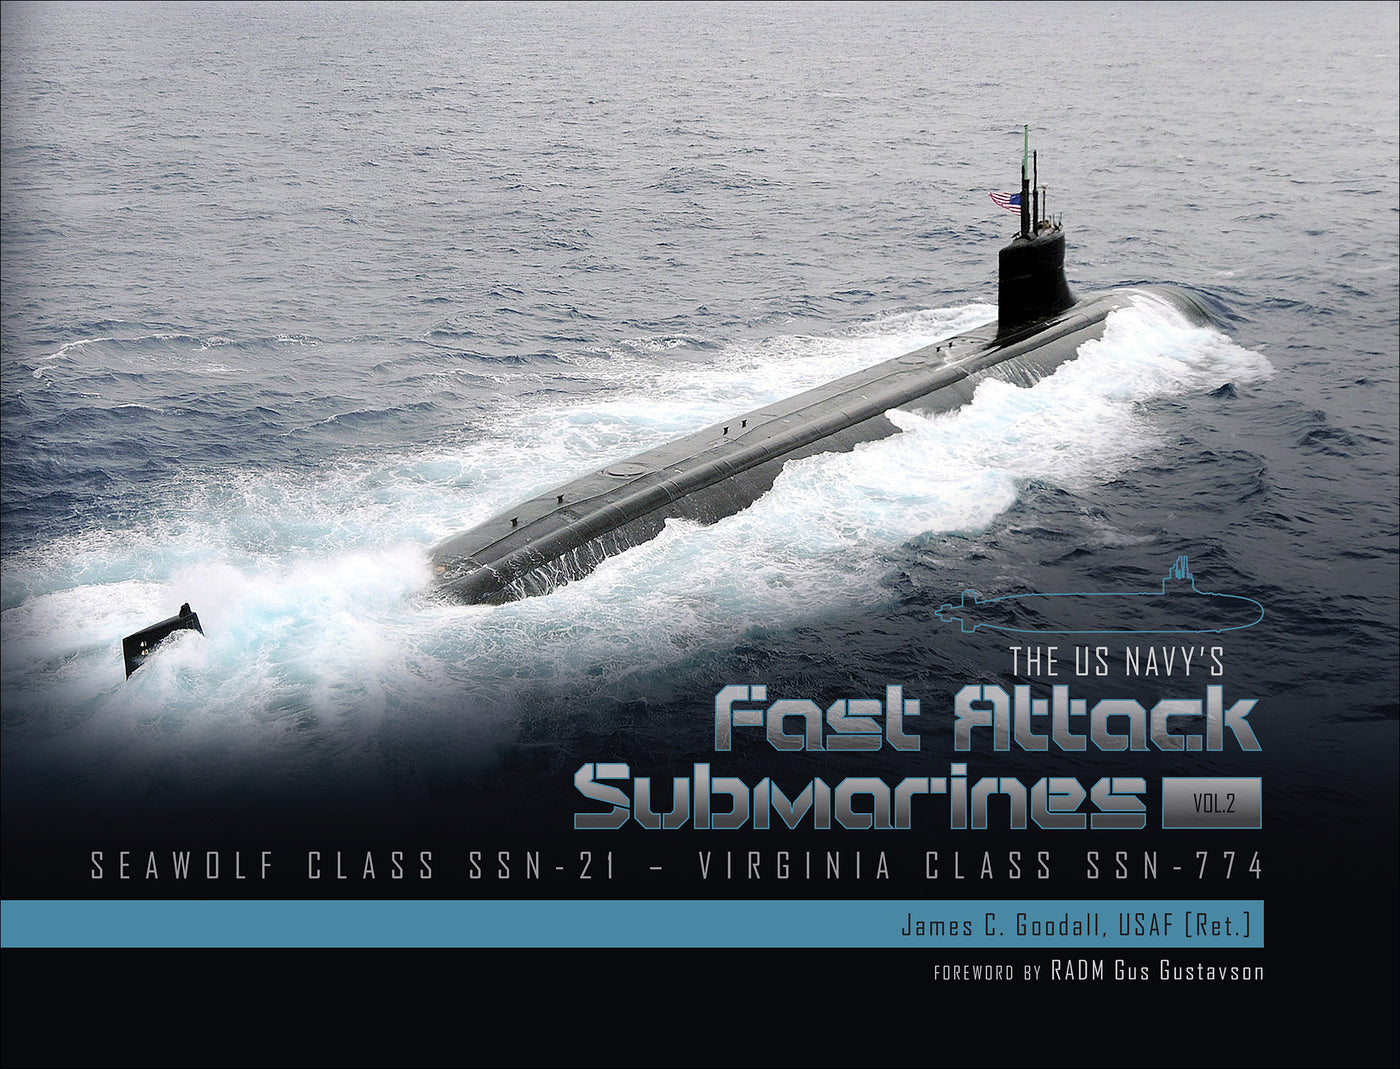 The US Navy's Fast-Attack Submarines, Vol. 2